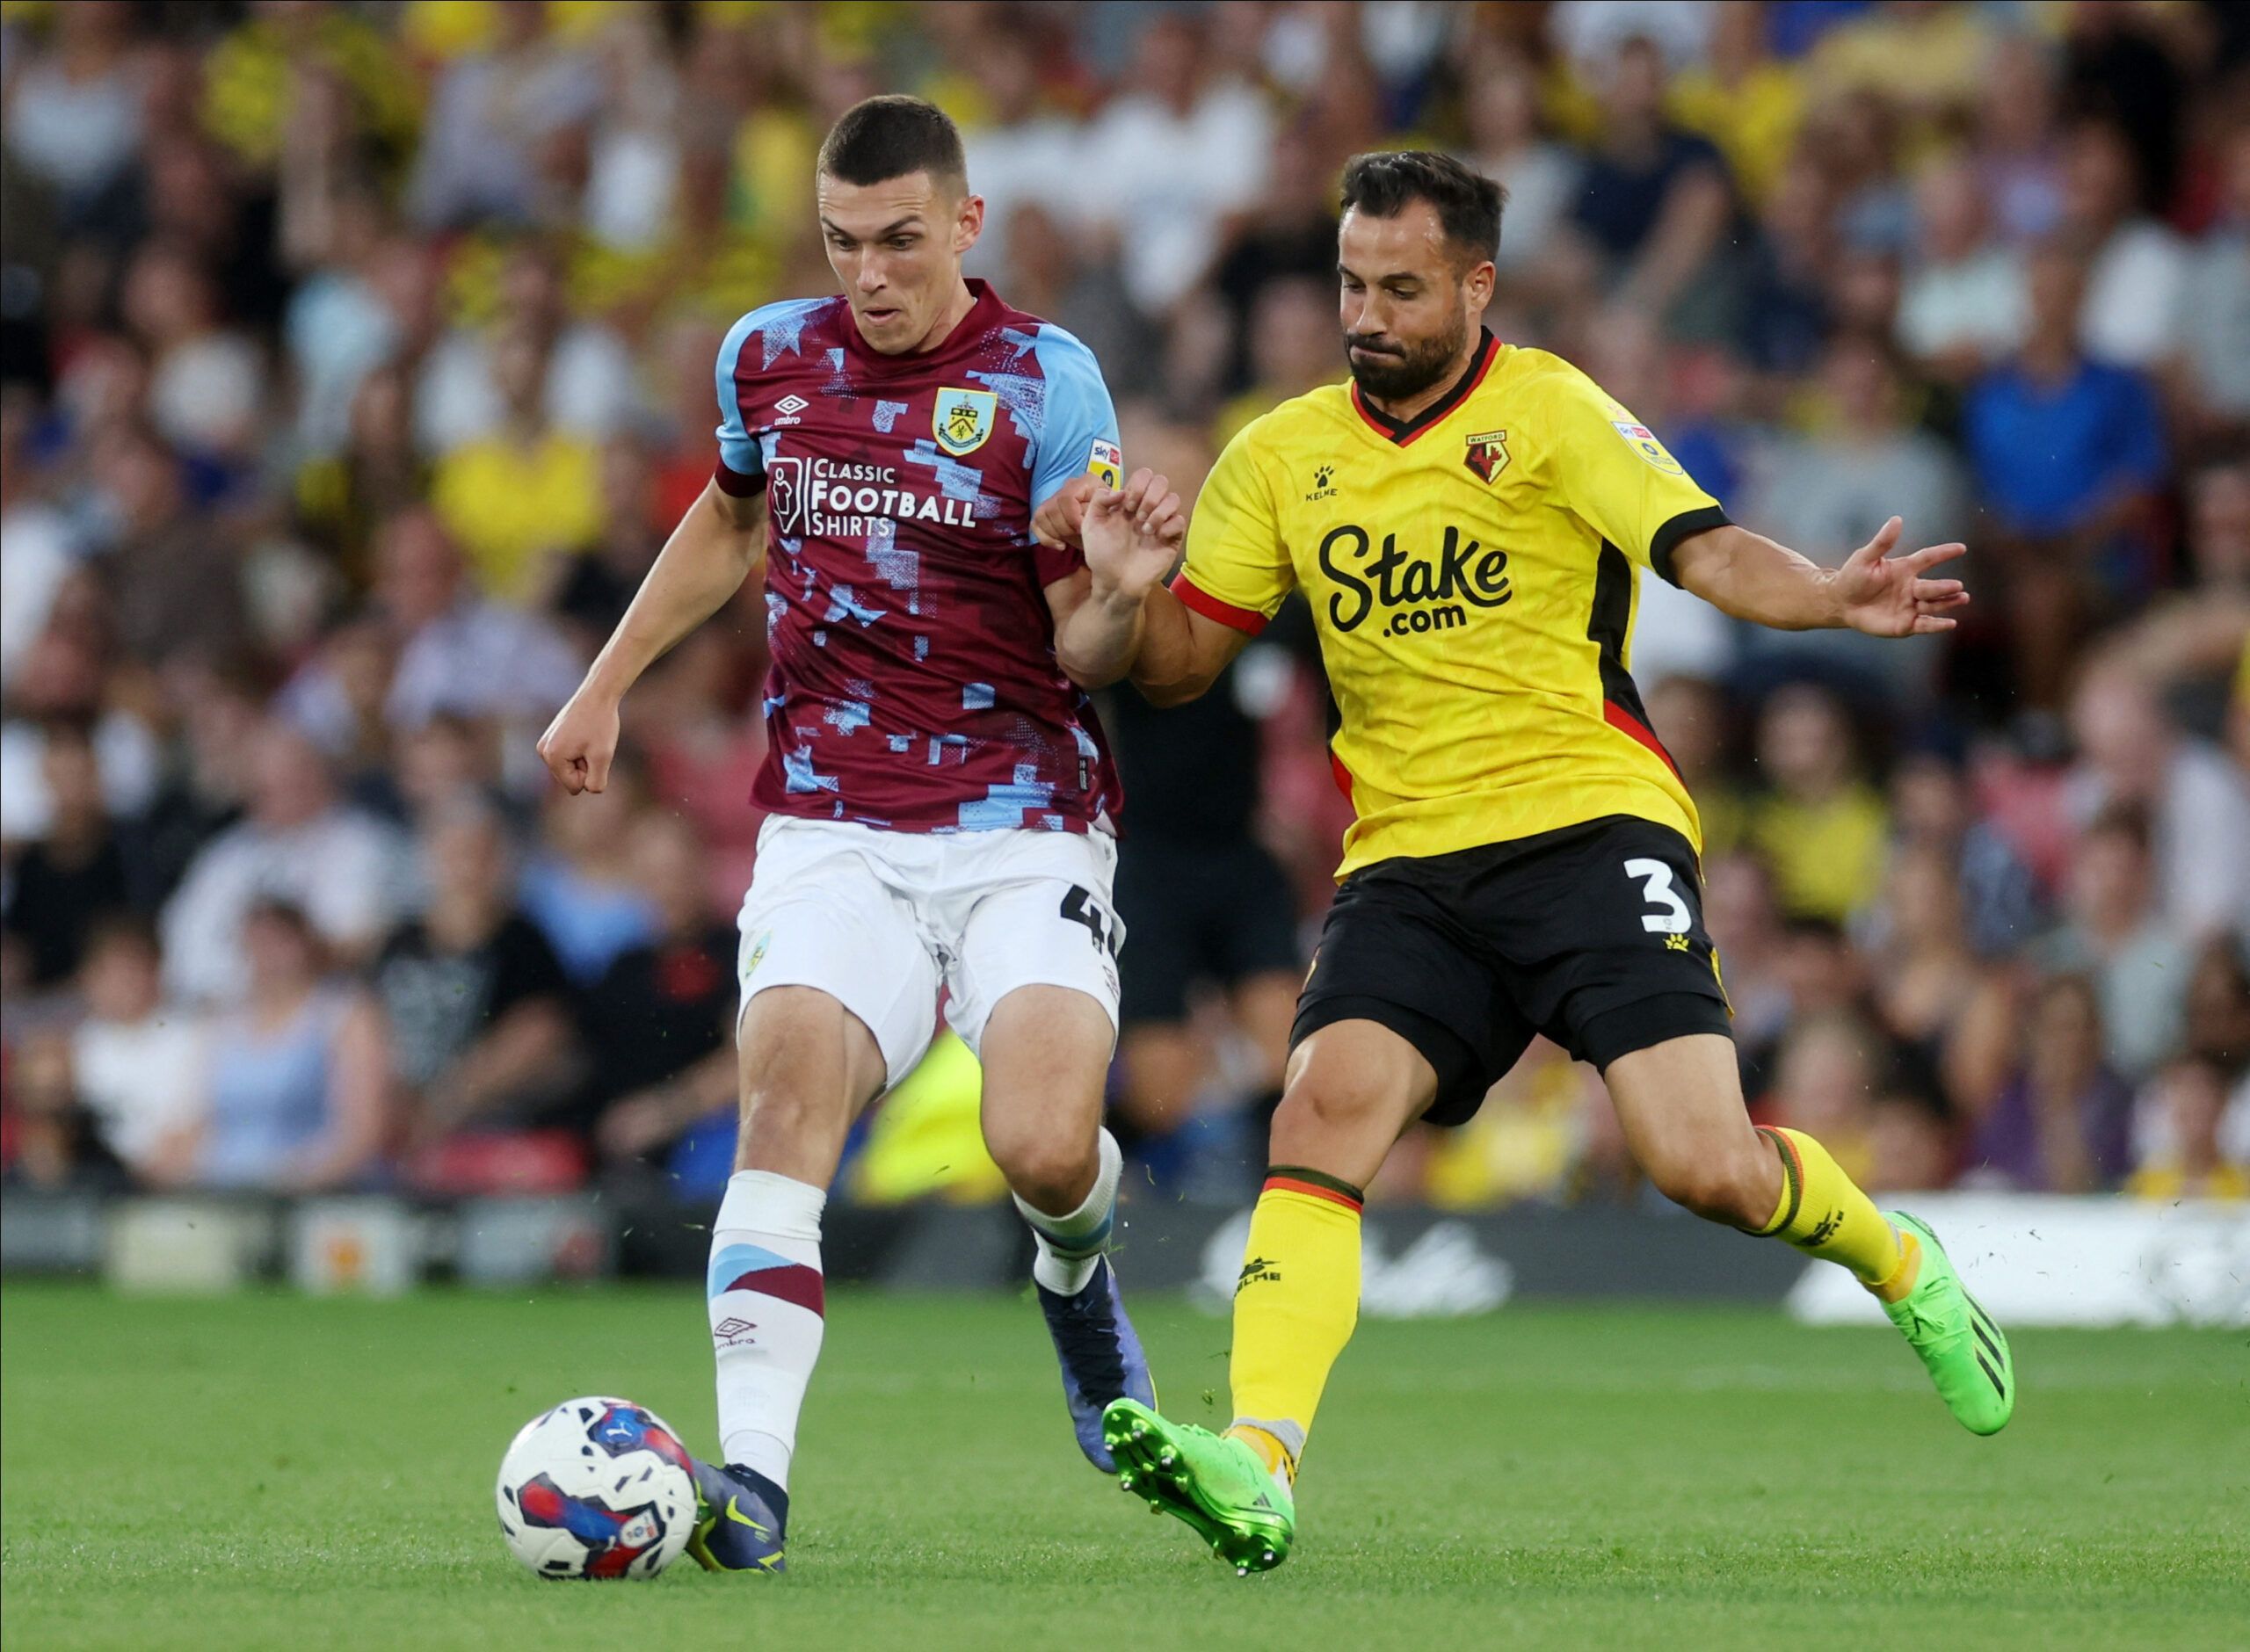 Soccer Football - Championship - Watford v Burnley - Vicarage Road, Watford, Britain - August 12, 2022 Watford's Mario Gaspar in action with Burnley's Dara Costelloe EDITORIAL USE ONLY. No use with unauthorized audio, video, data, fixture lists, club/league logos or 